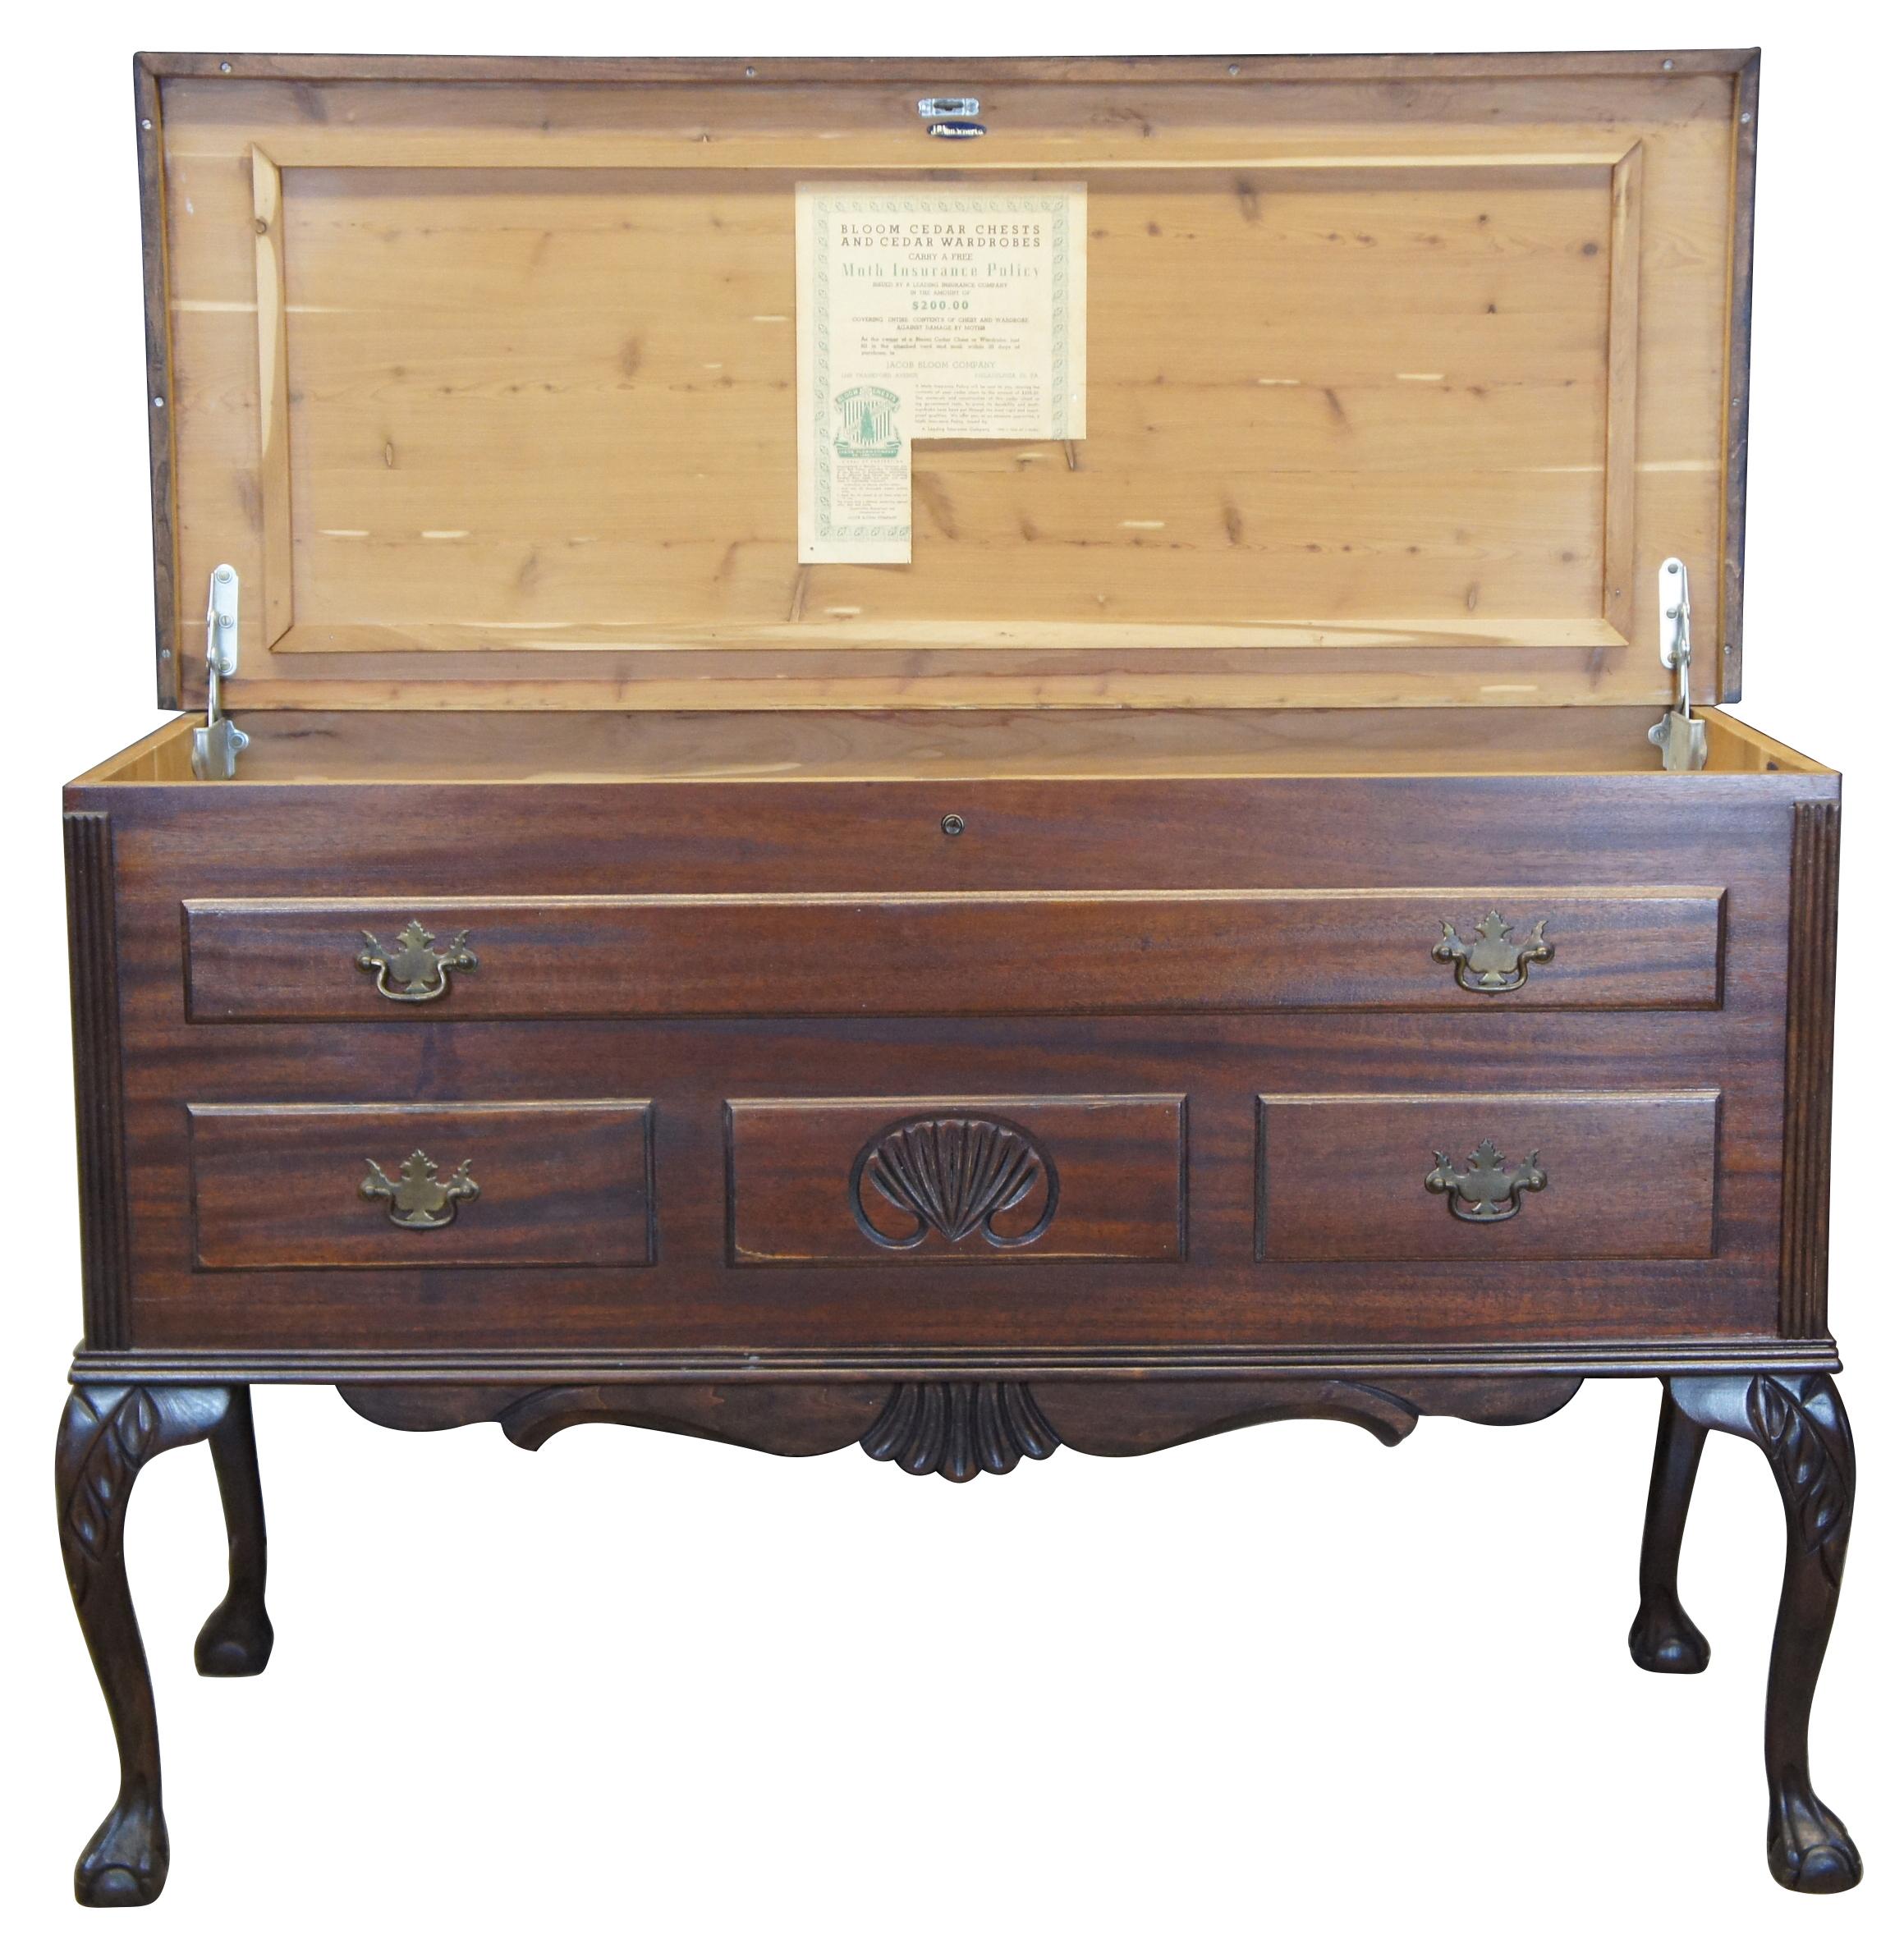 Jacob Bloom Company circa 1930s red cedar lined chest or coffer. Made from mahogany with Chippendale styling. Features three false drawers along the front, scalloped carvings, a serpentine crest and cabriole legs leading to ball and claw feet. This